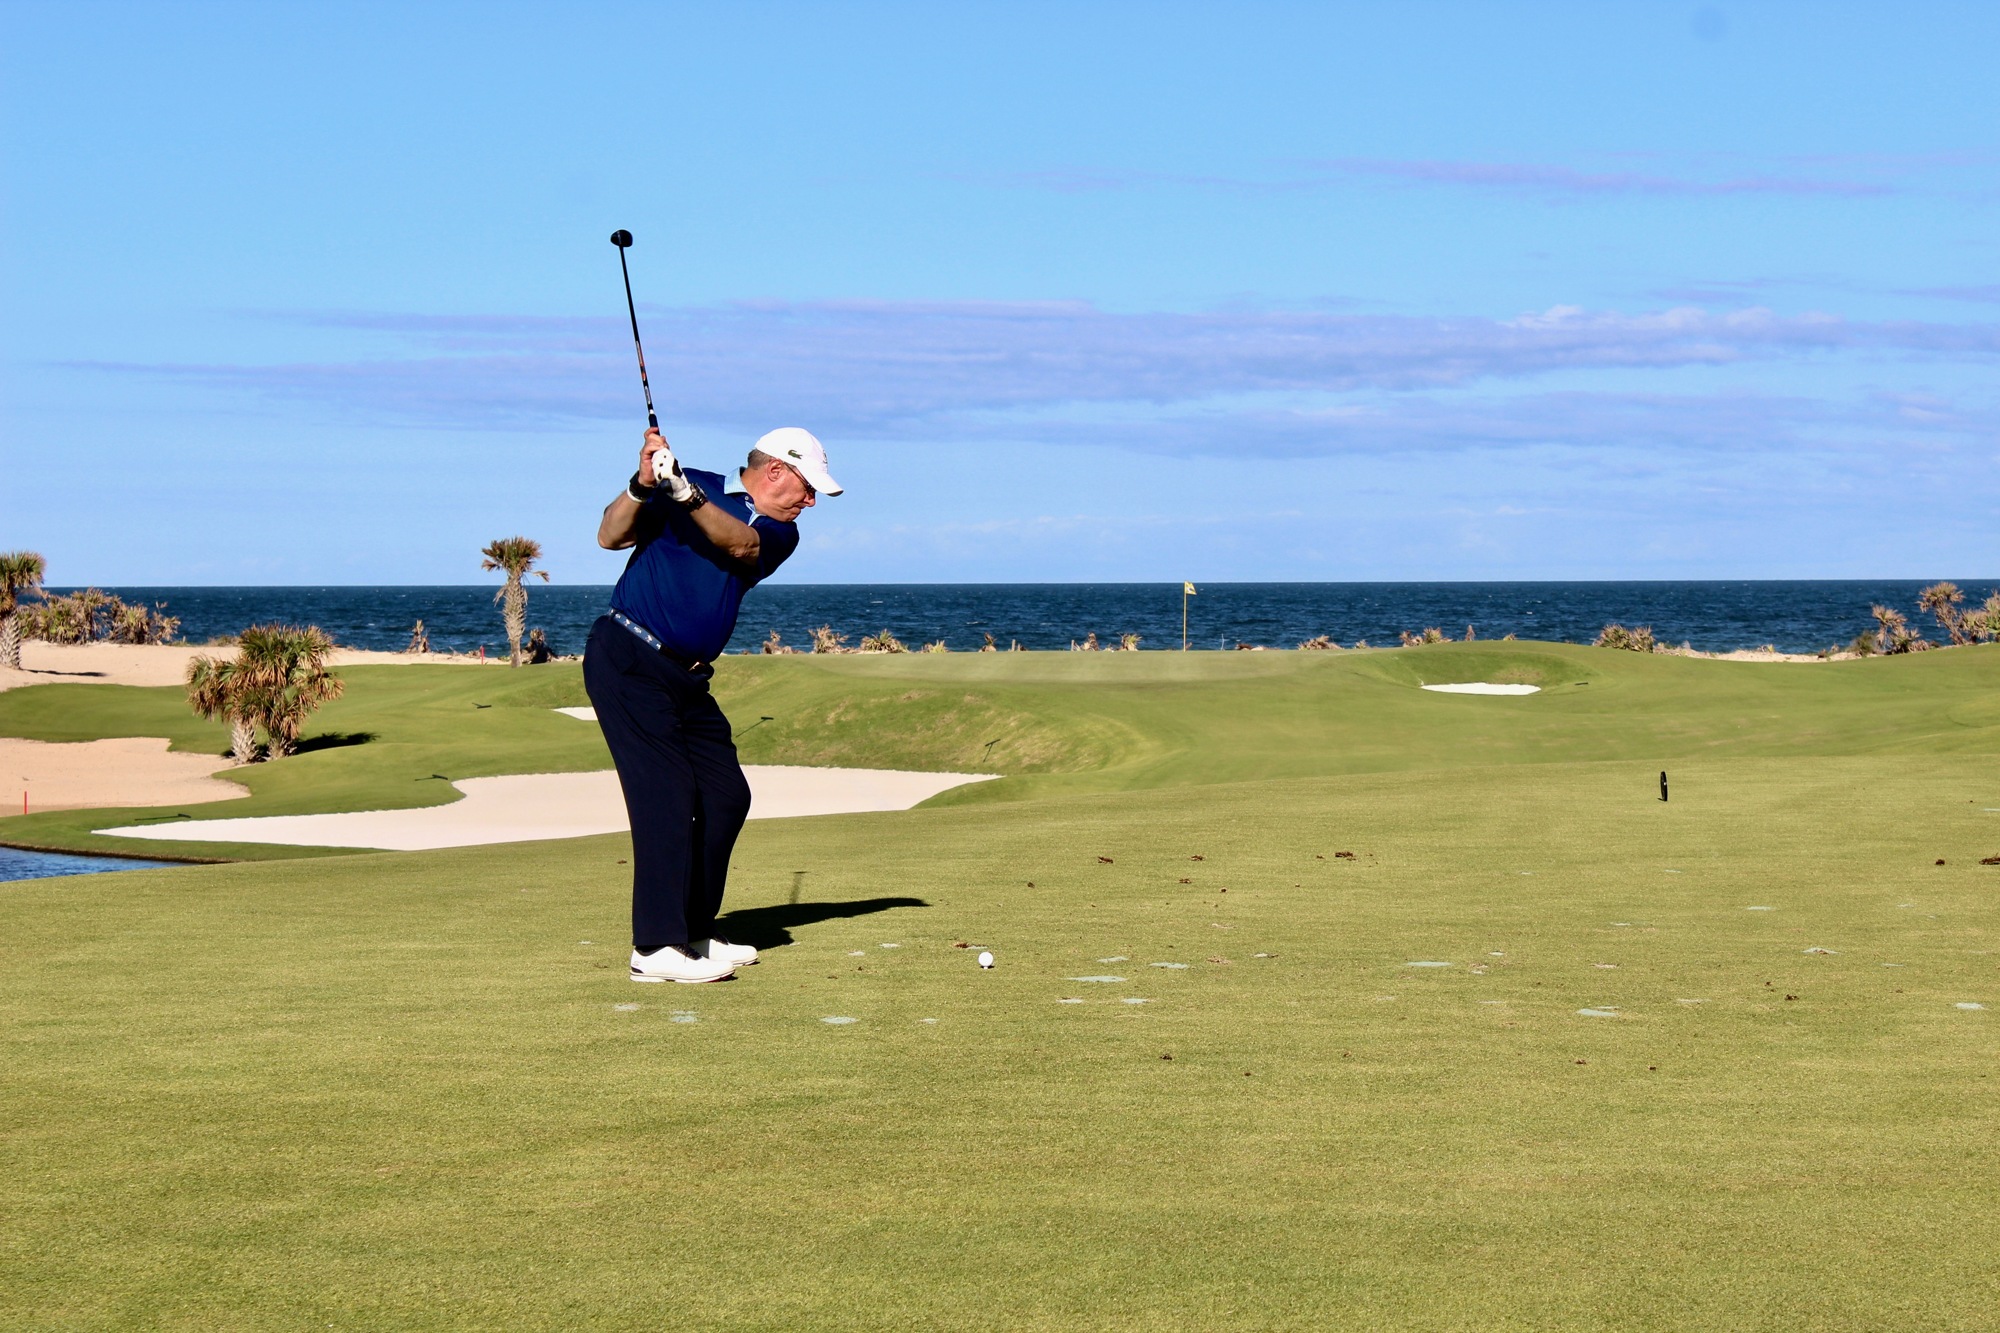 Les Schupak tees it up on the 17th hole at the Hammock Beach Resort's Ocean Course. Photo by Ray Boone